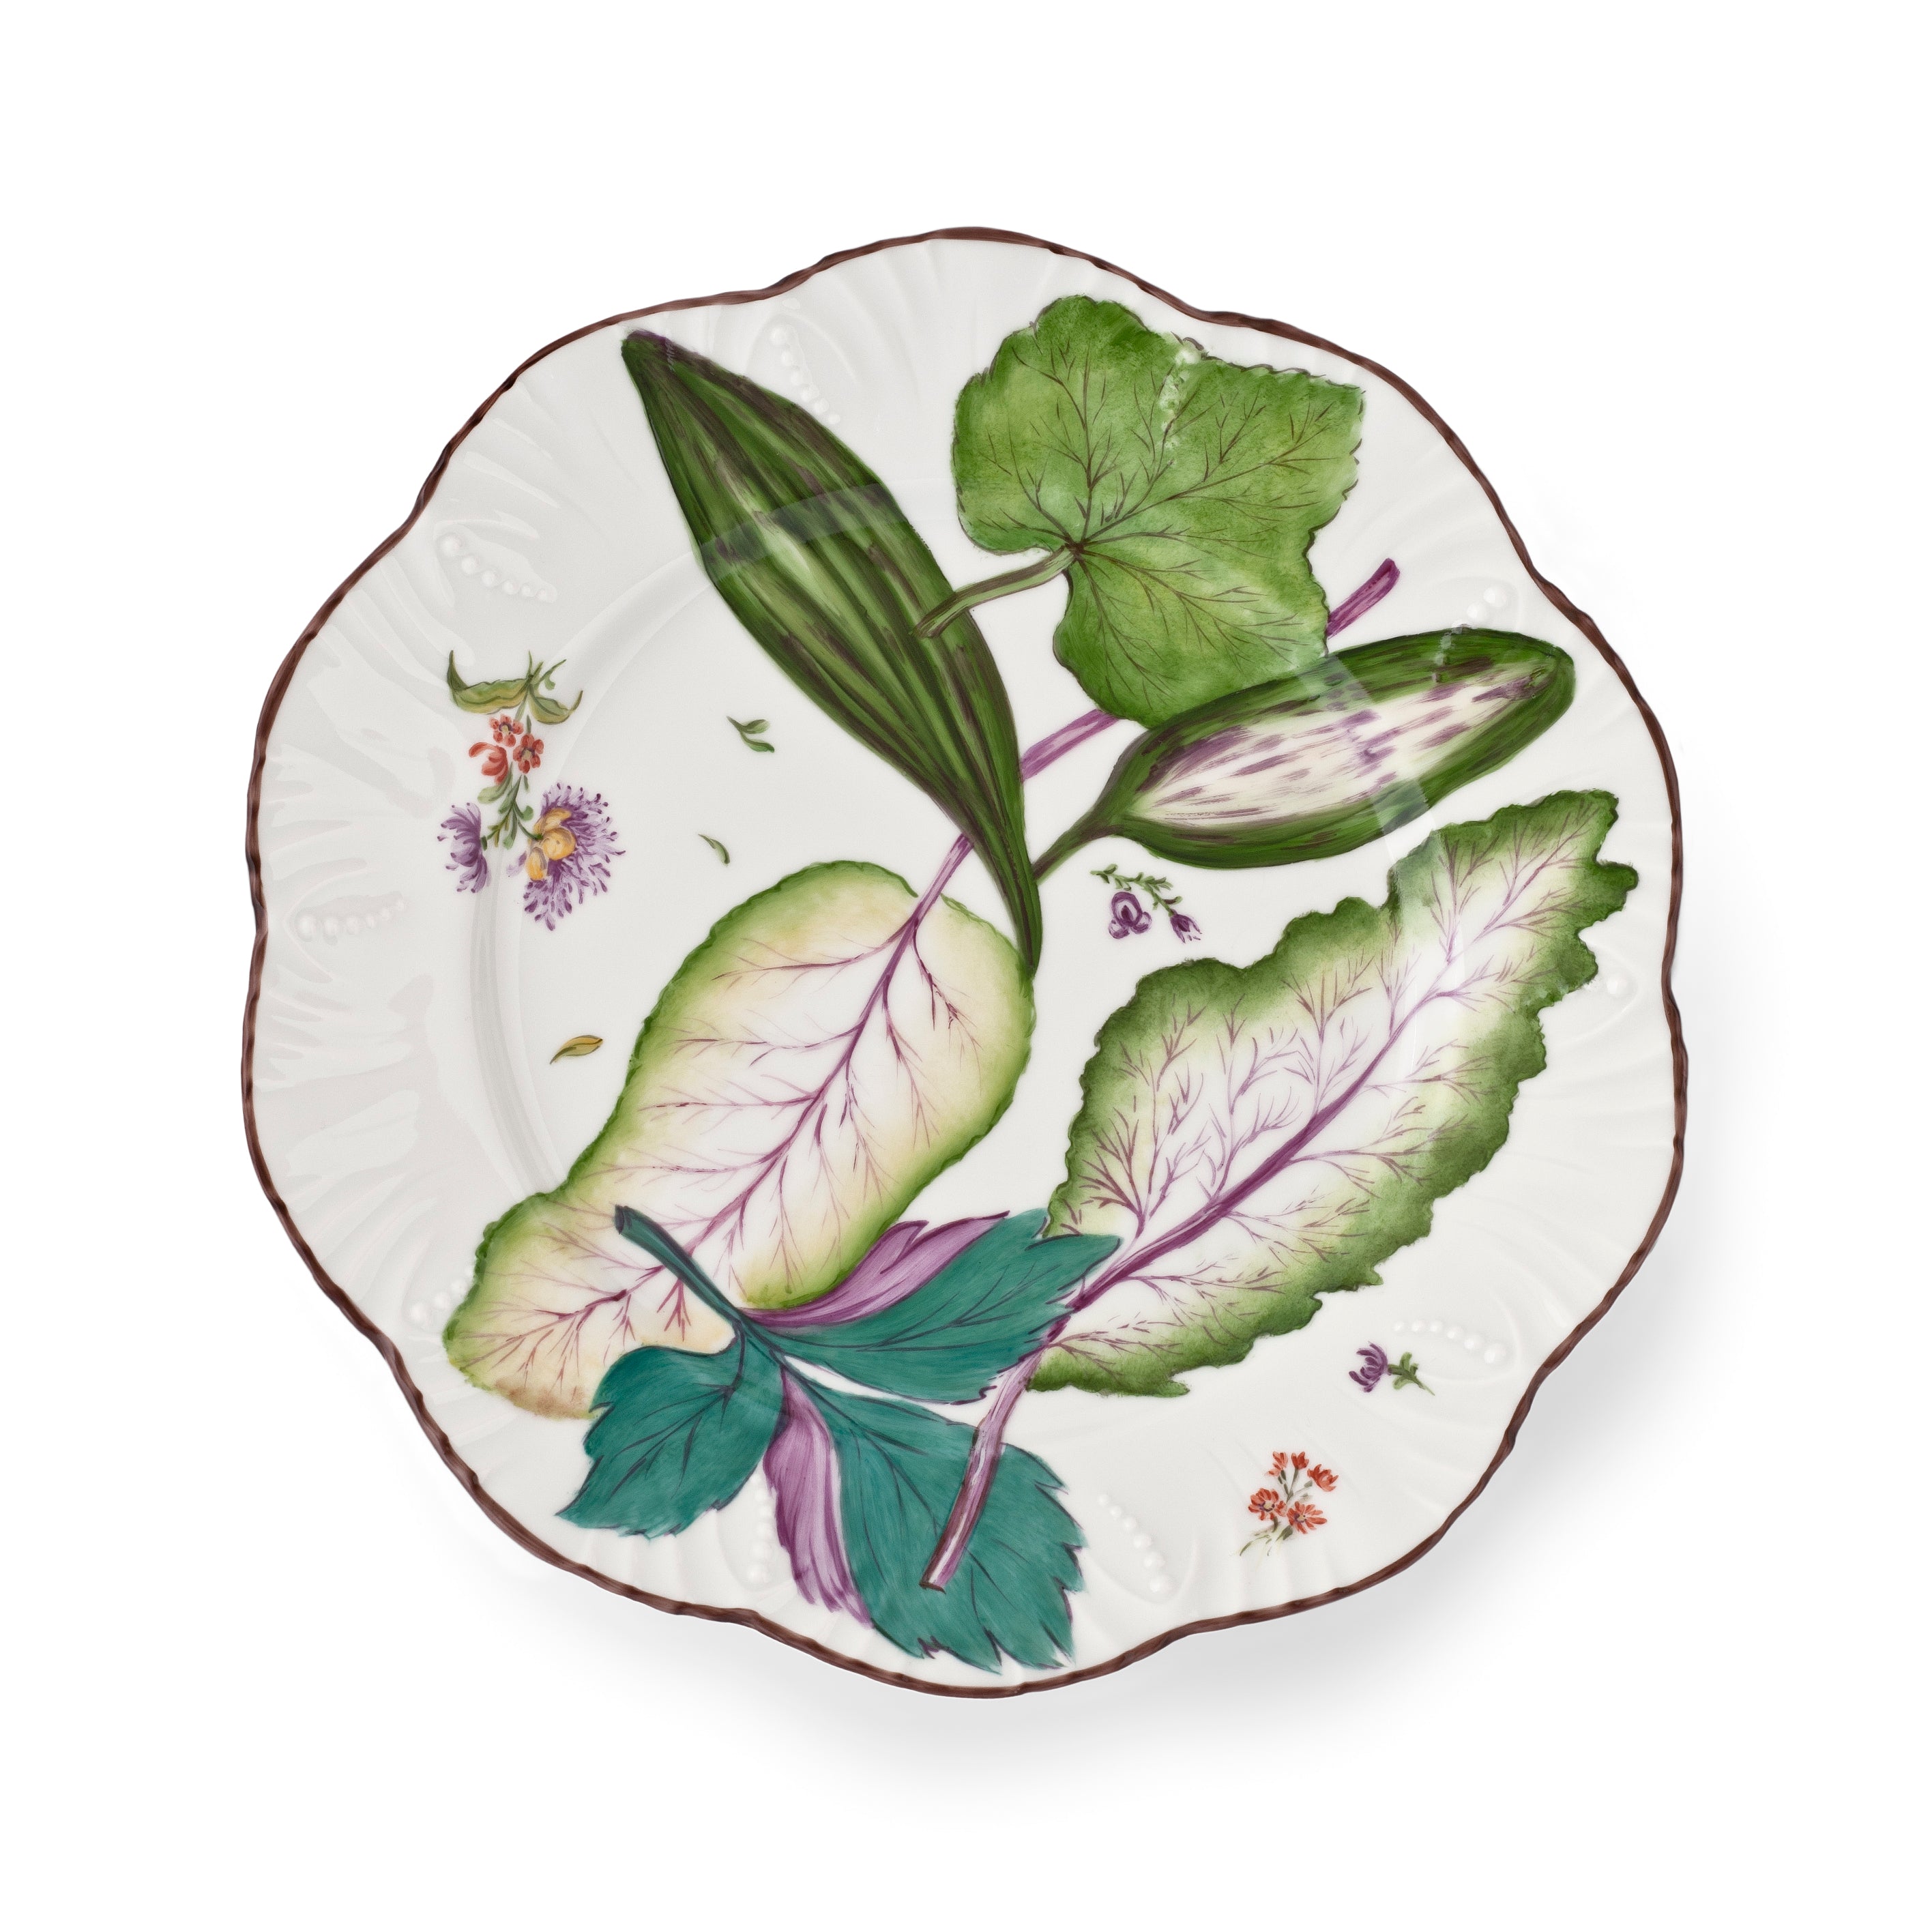 Feuillages - Dinner plate 09